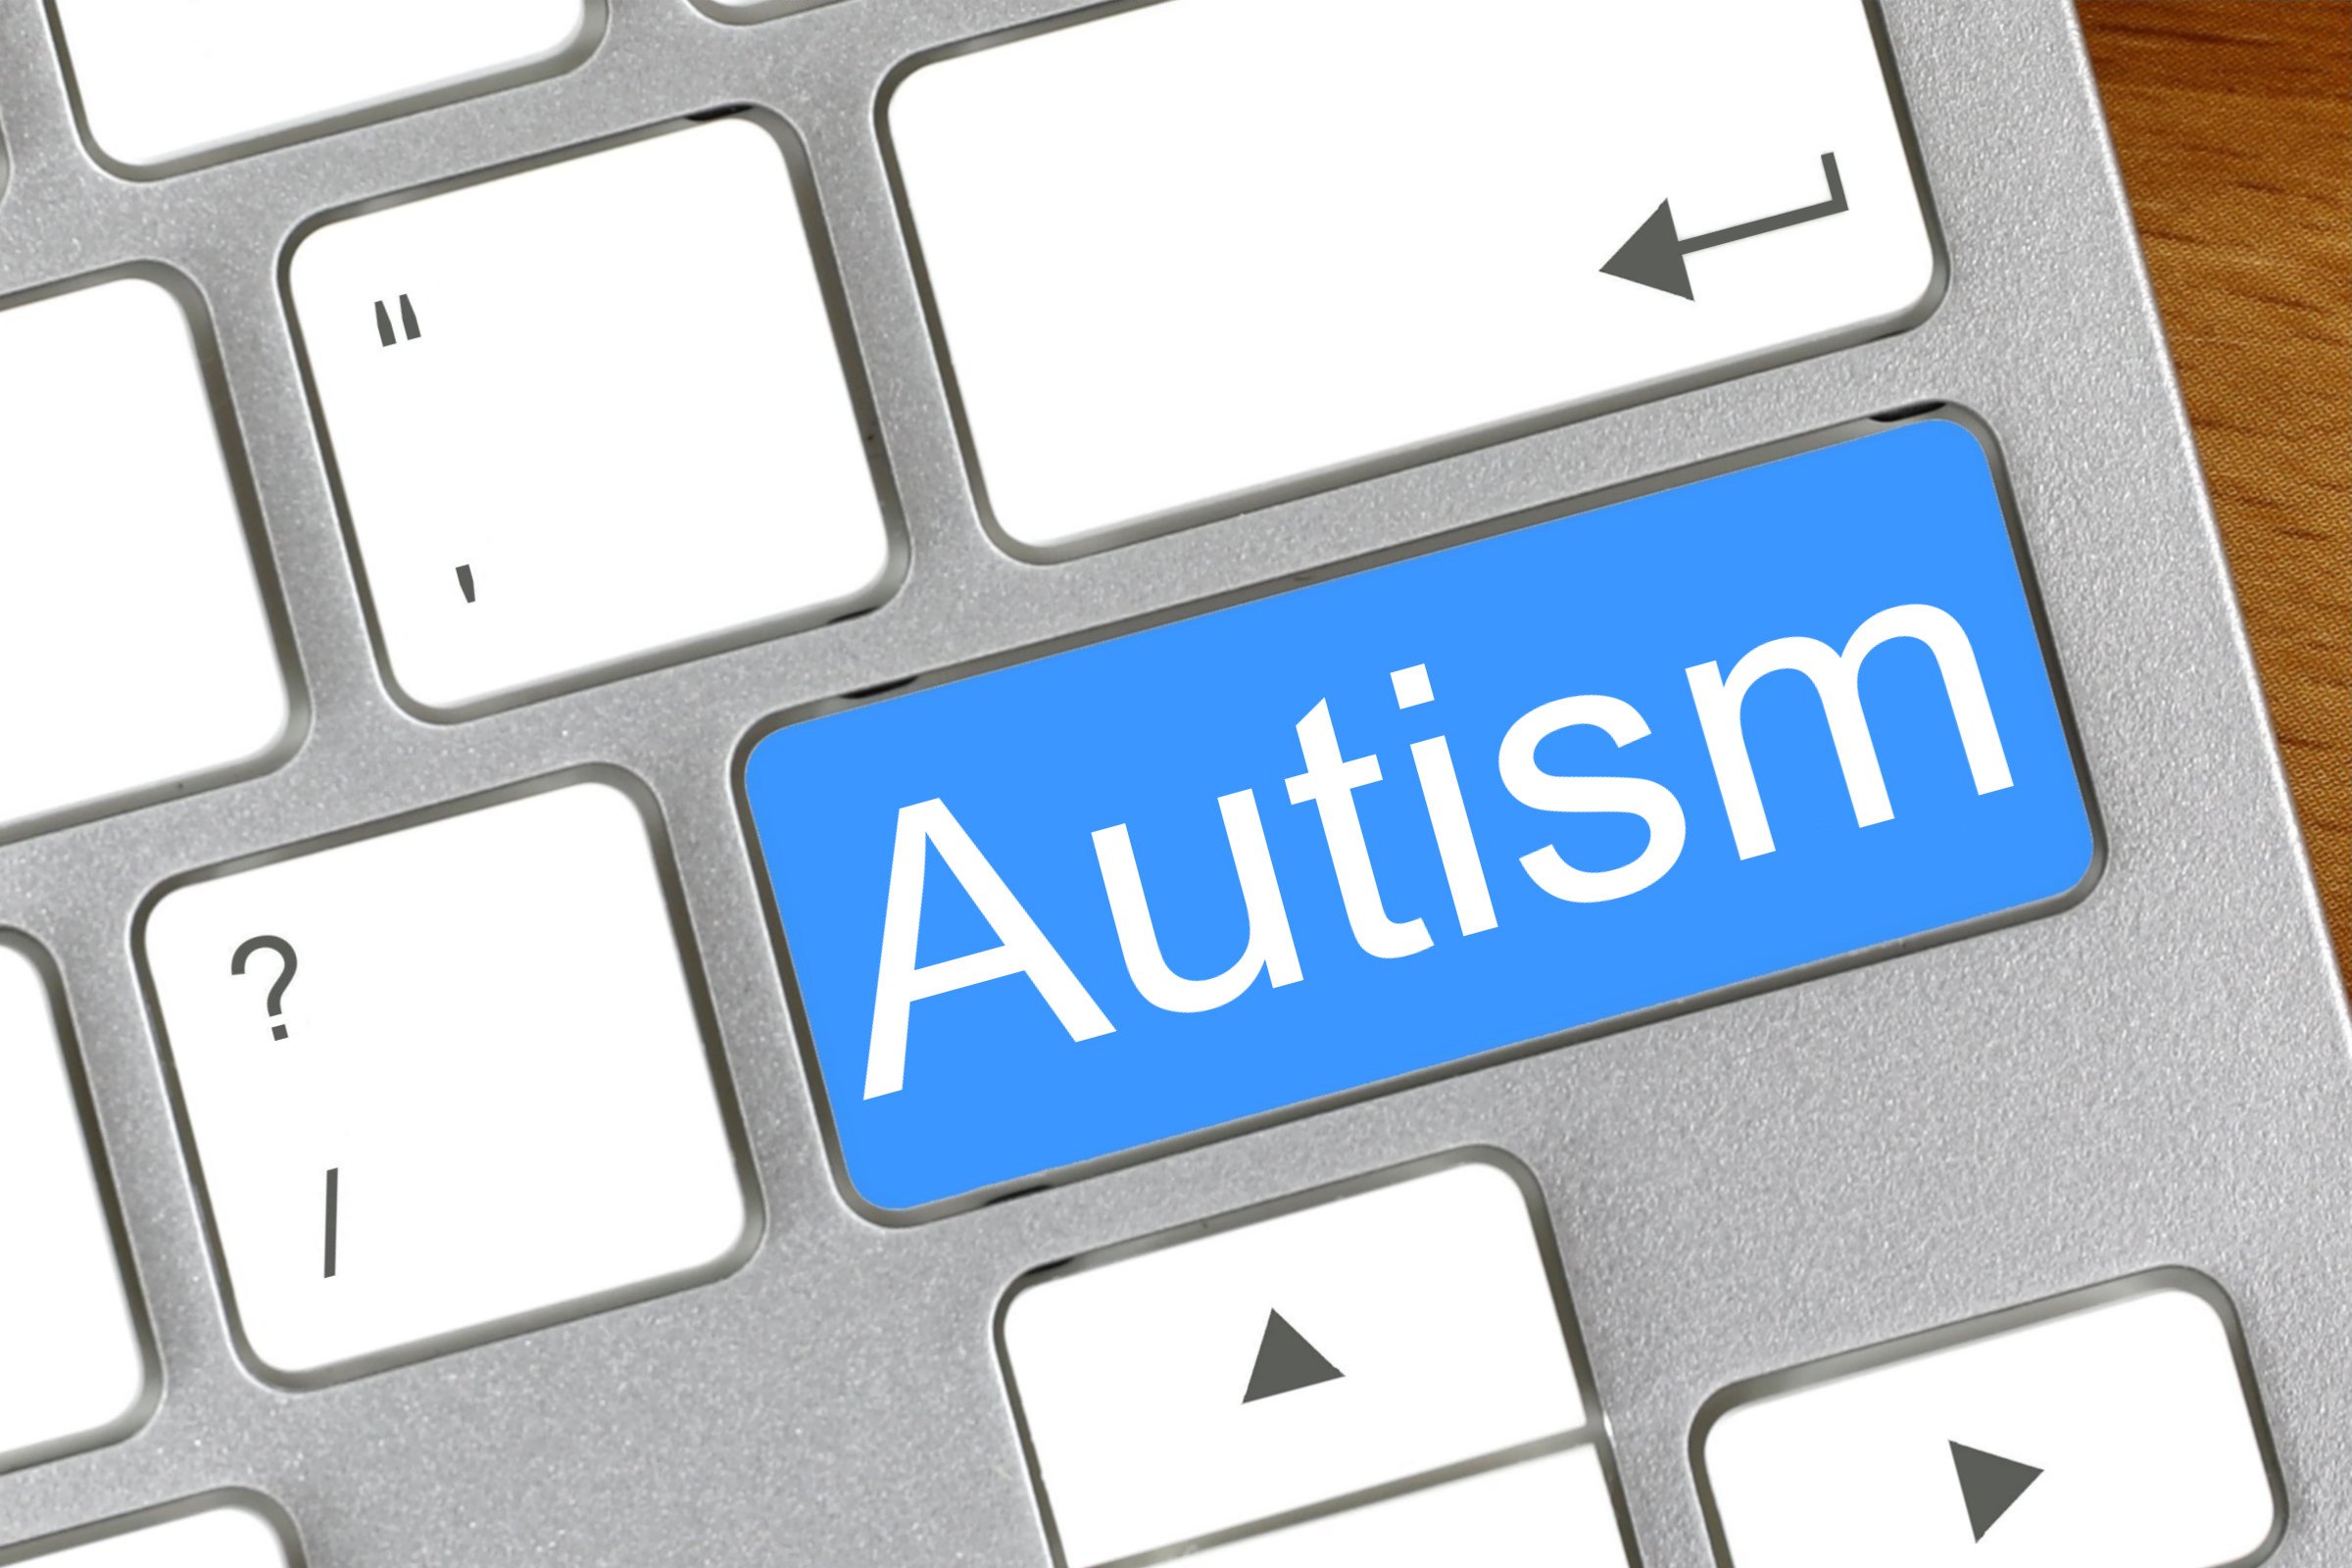 Autism Free Of Charge Creative Commons Keyboard Image